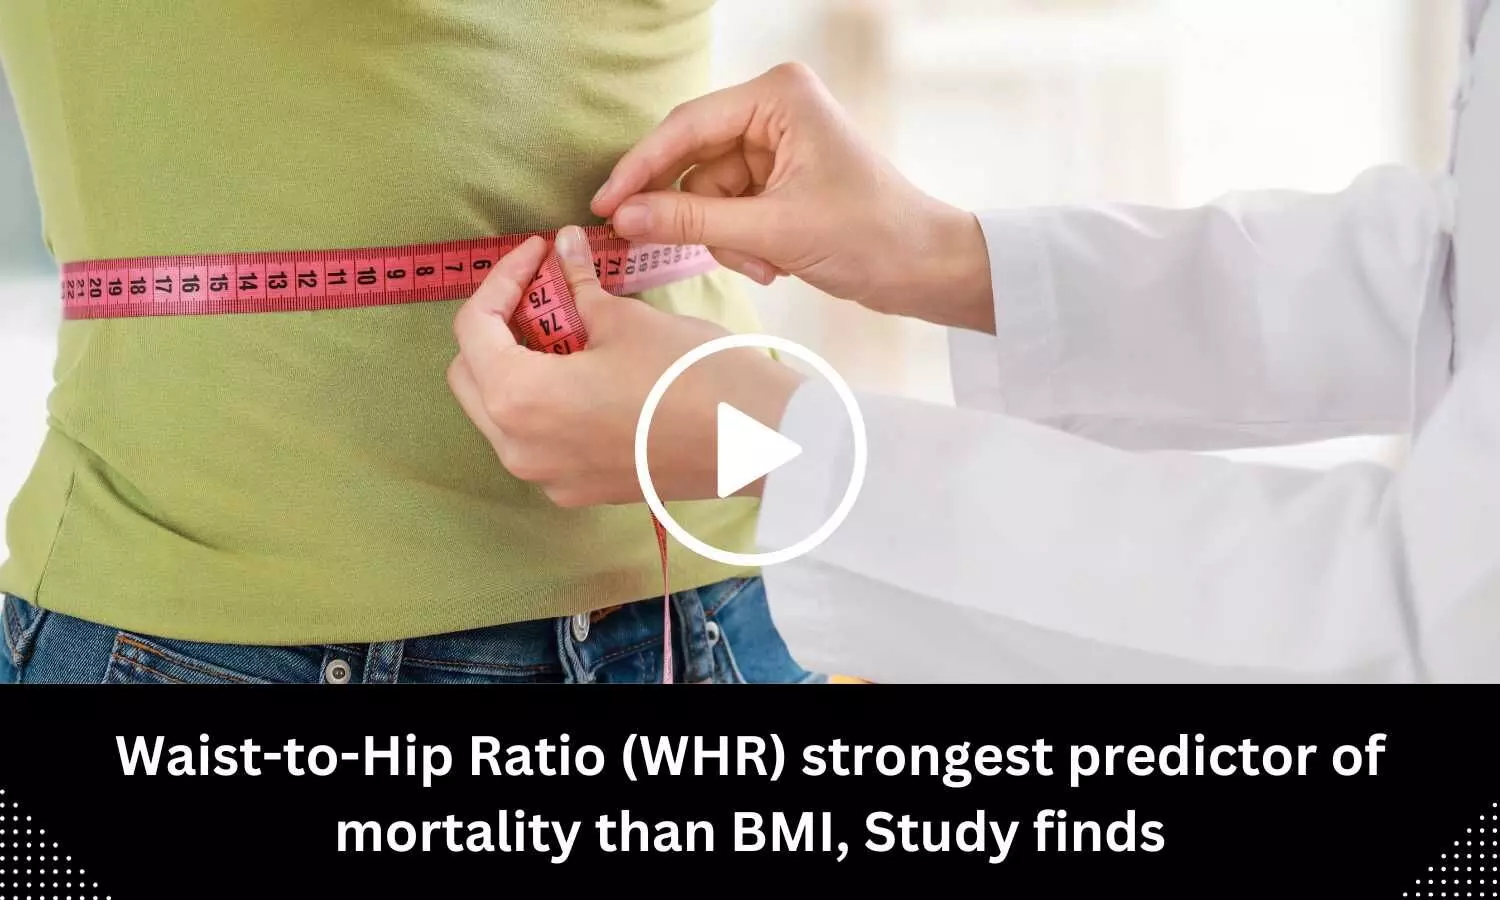 Waist-to-Hip Ratio strongest predictor of mortality than BMI, finds study